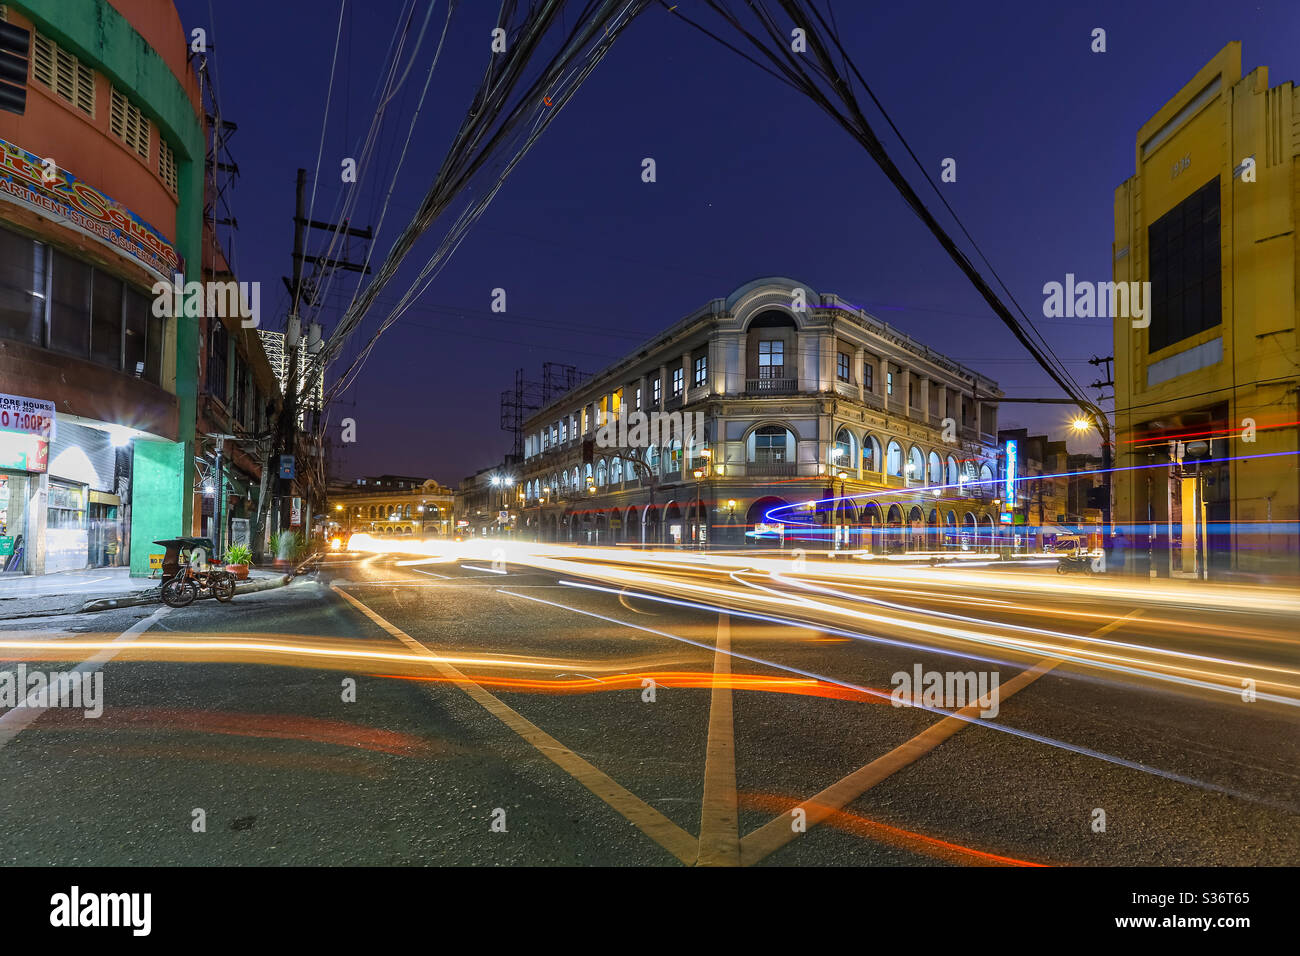 Calle Real (Royal Street) or J.M. Basa Street is a historic street in old downtown Iloilo City, Philippines. The street features many neoclassical, beaux-arts, and Art Deco buildings. Long exposure Stock Photo